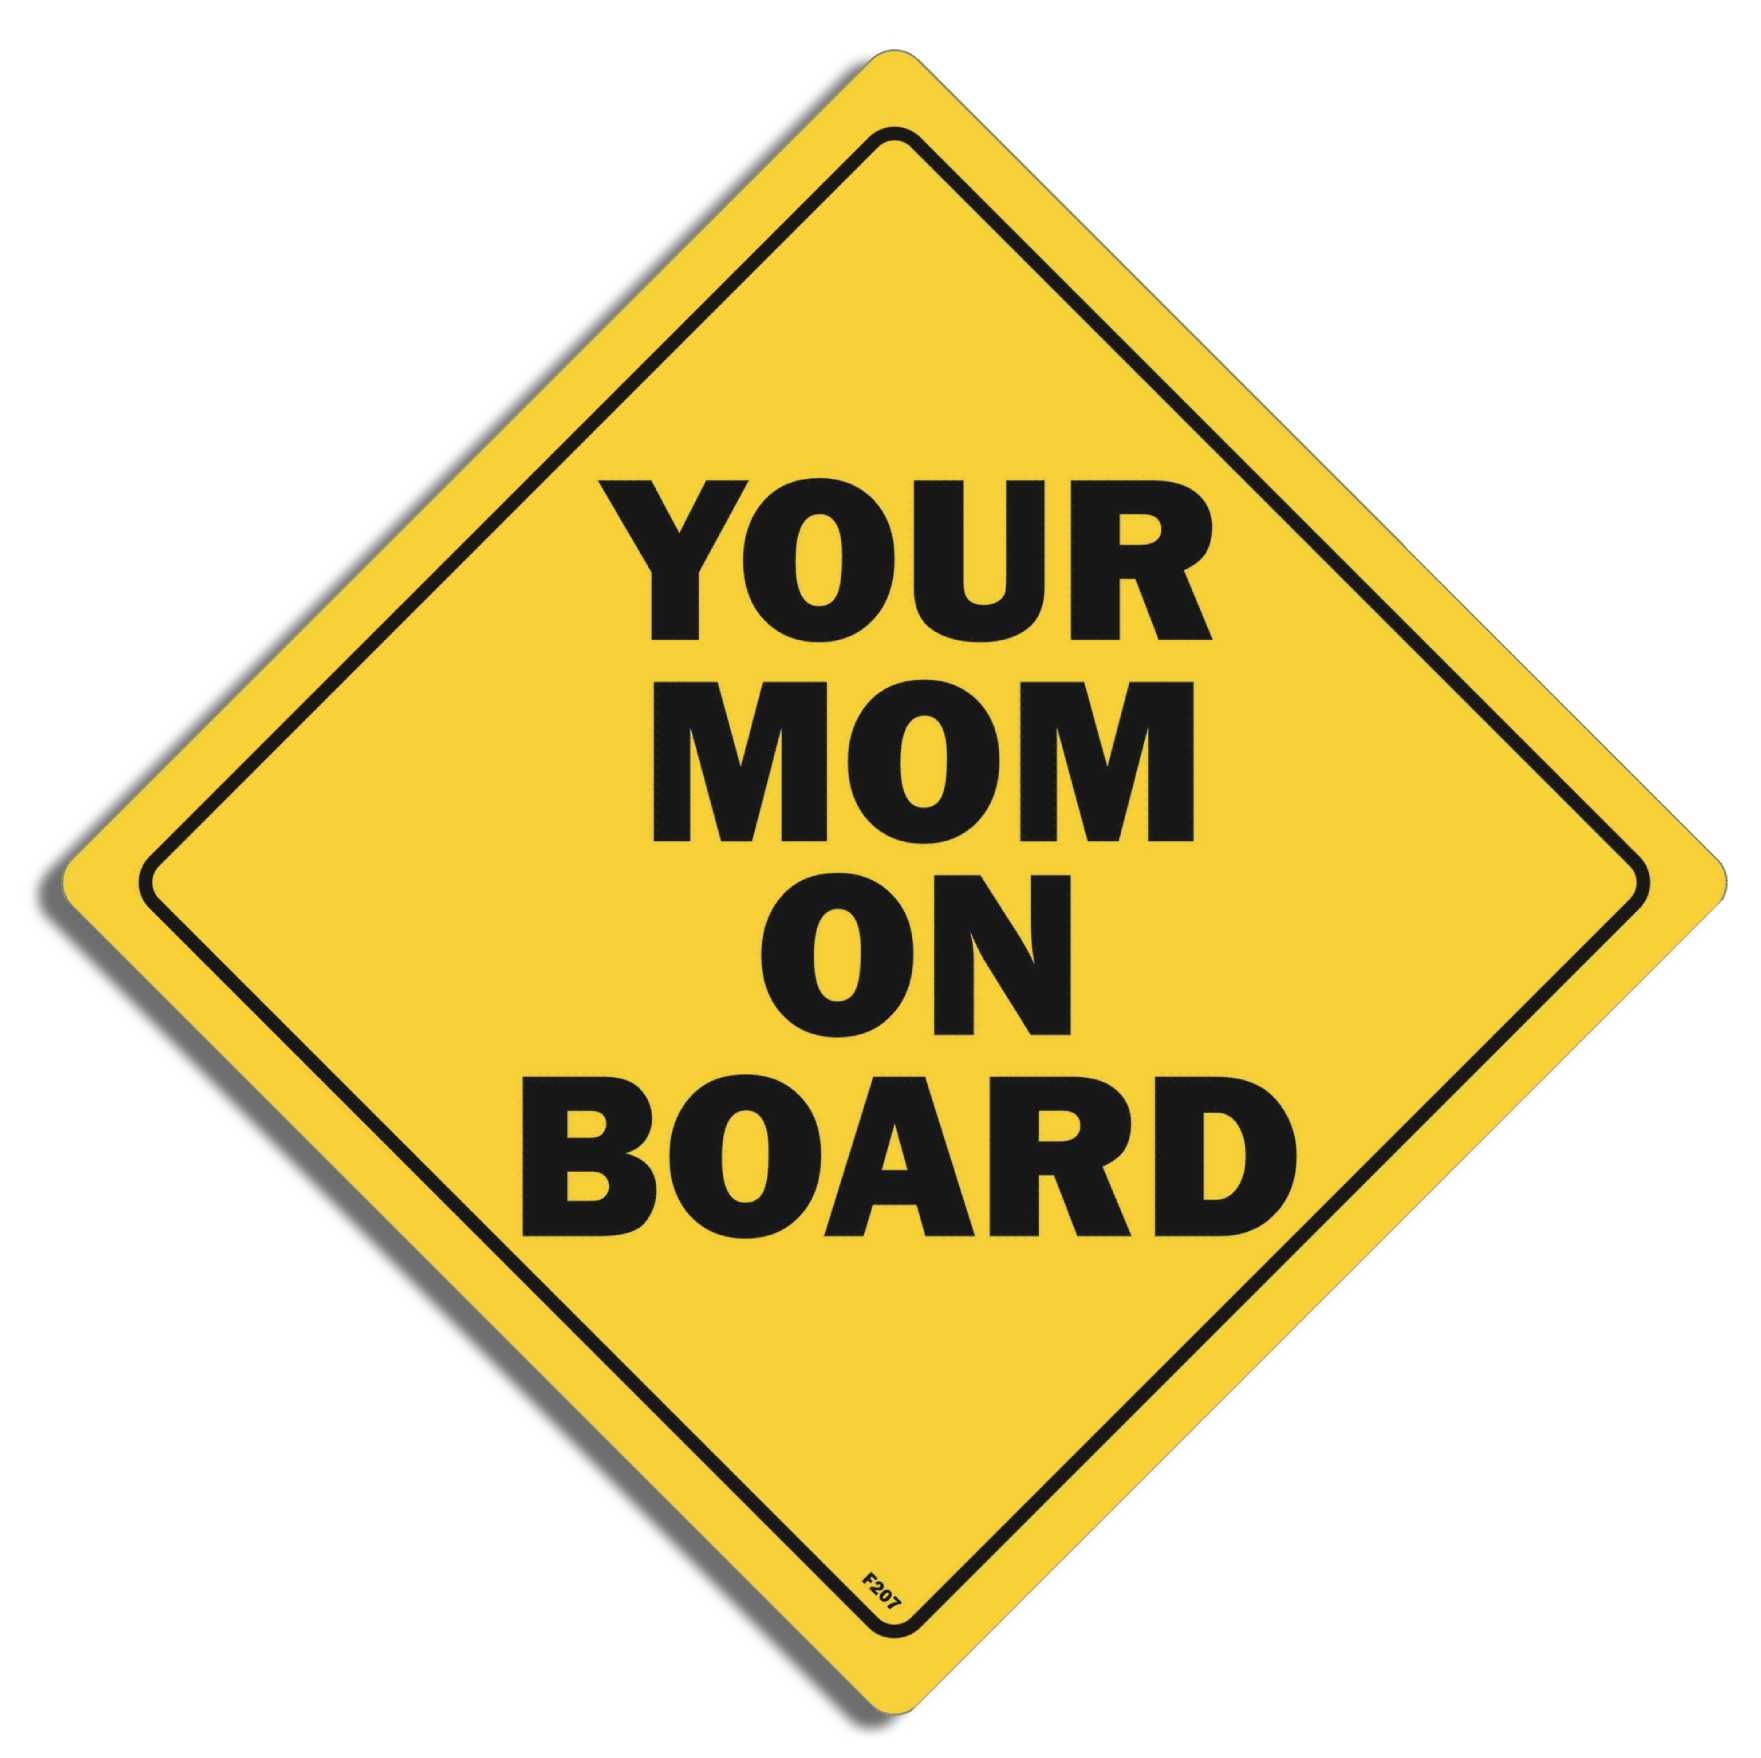 Your Mom on Board - 5" x 5" Bumper Sticker--Car Magnet- -  Decal Bumper Sticker-funny Bumper Sticker Car Magnet Your Mom on Board-  Decal for carscaution, funny, your mom